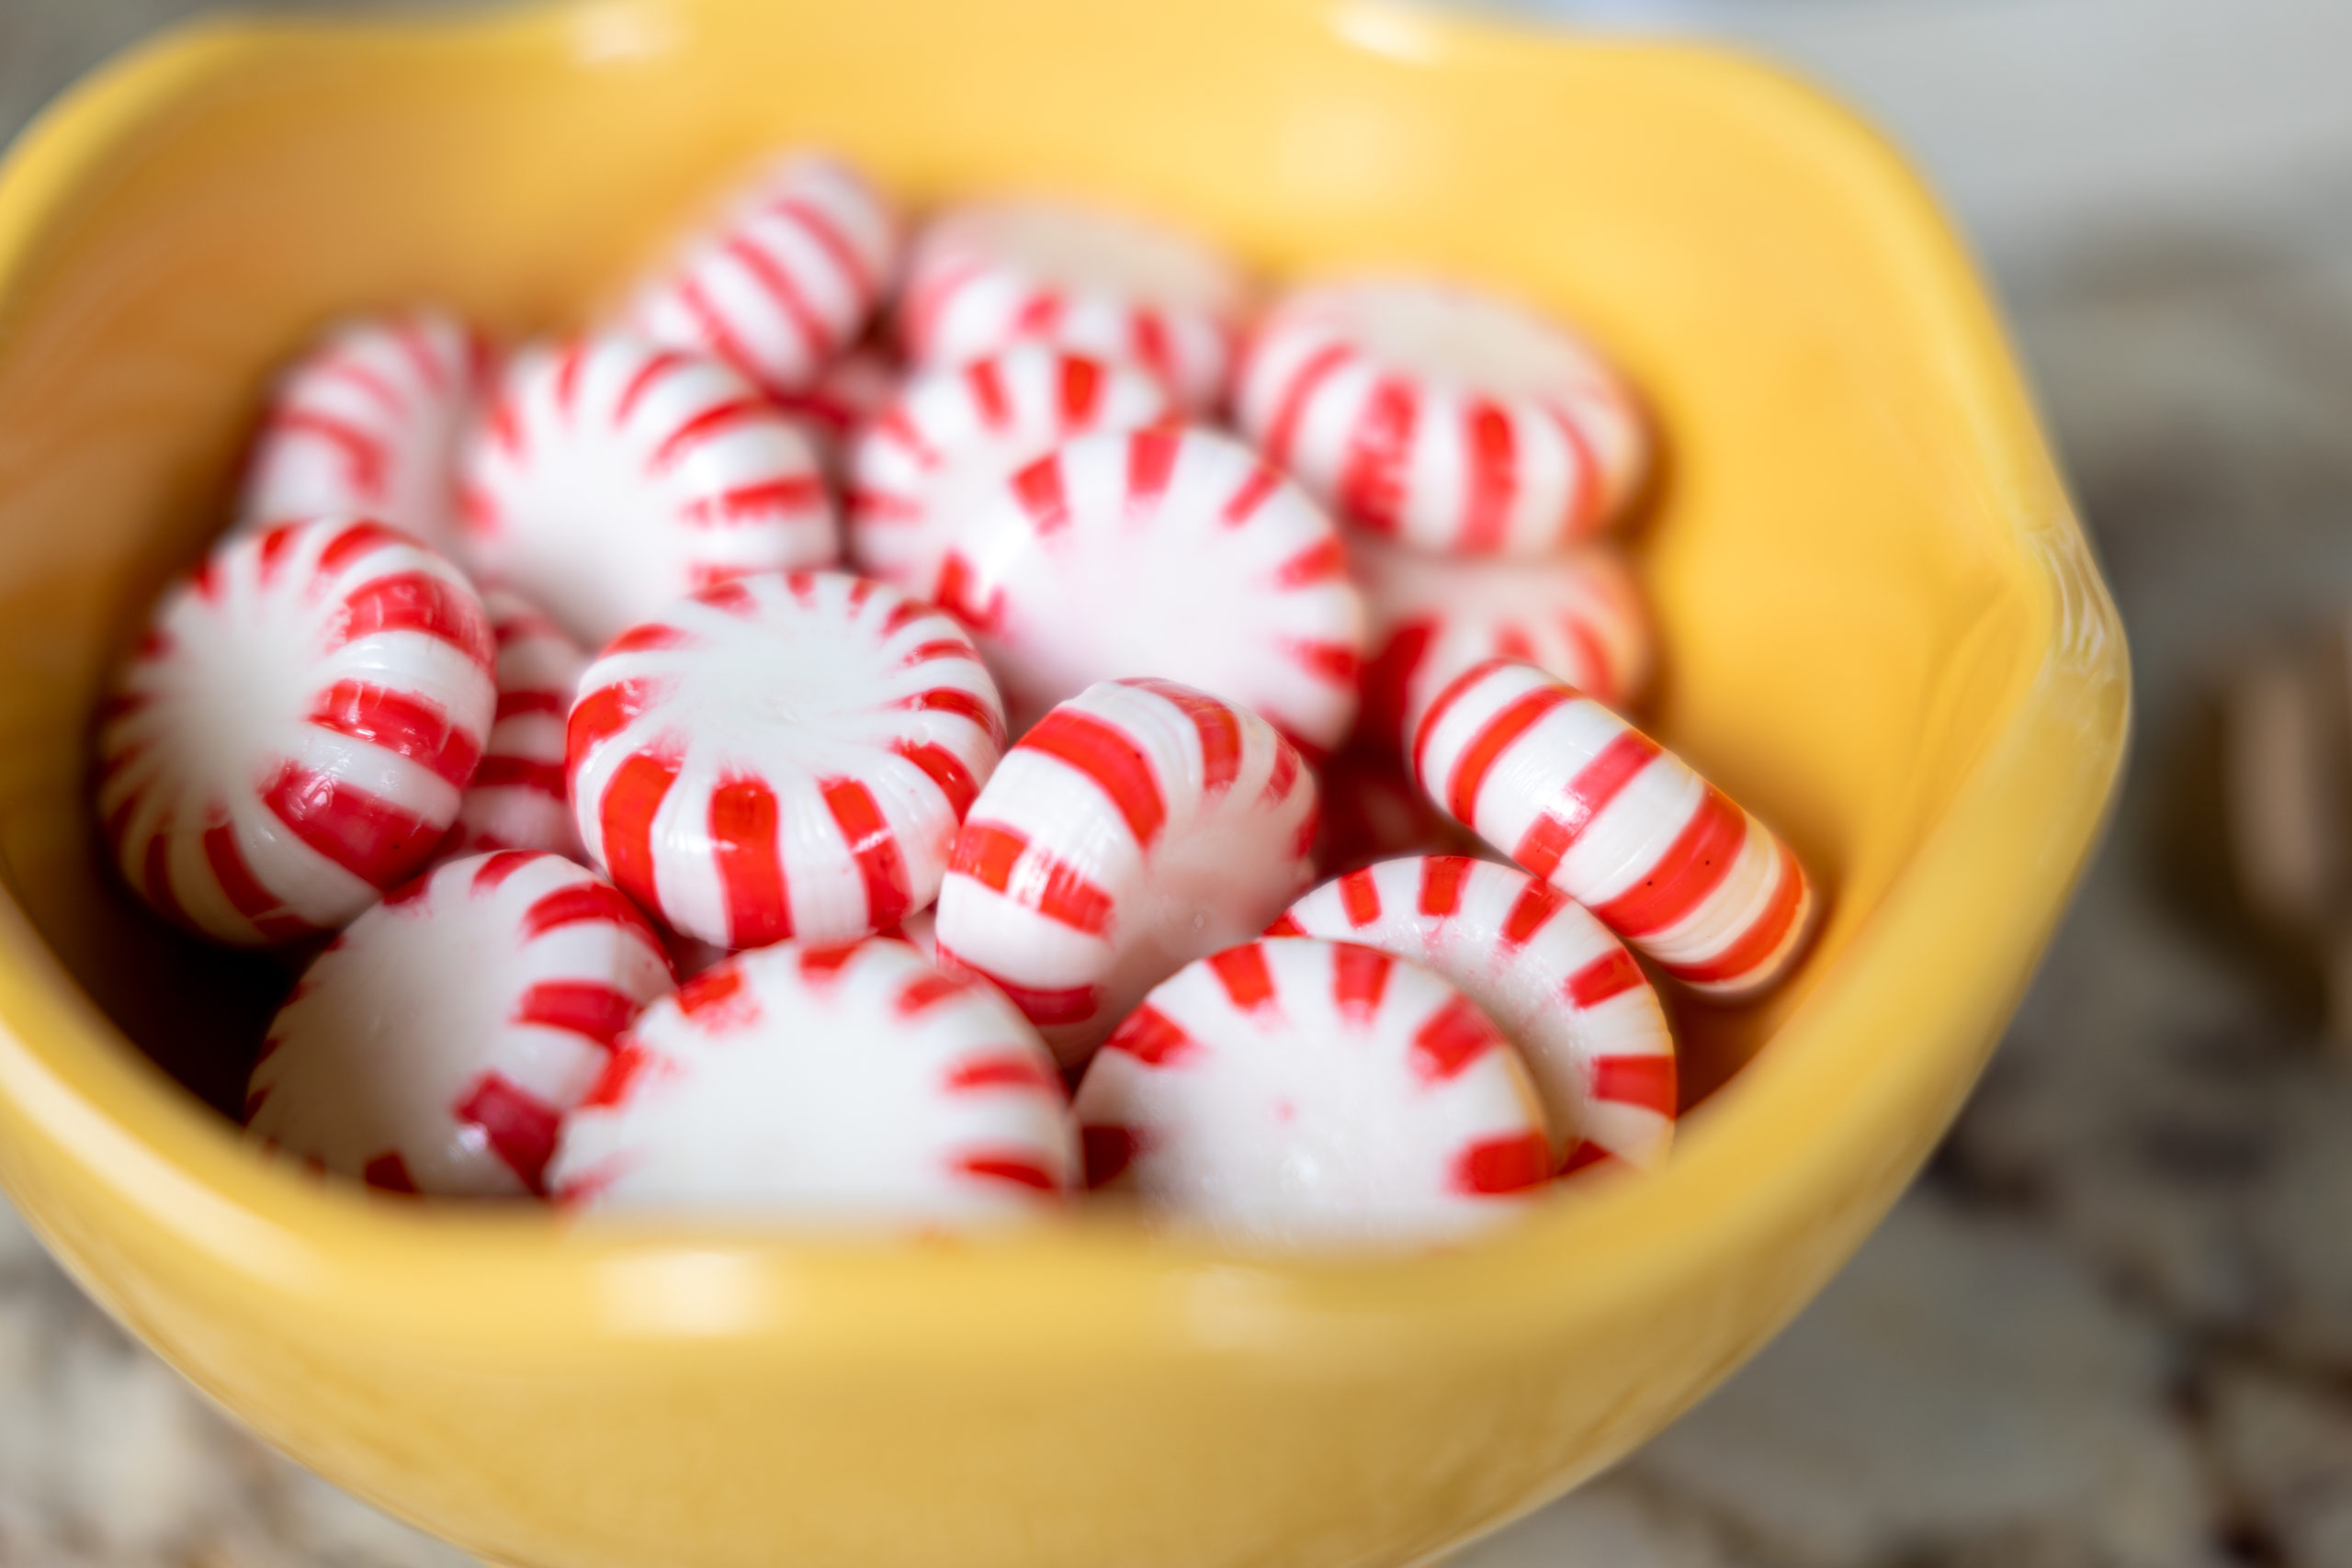 Bowl of peppermint candies